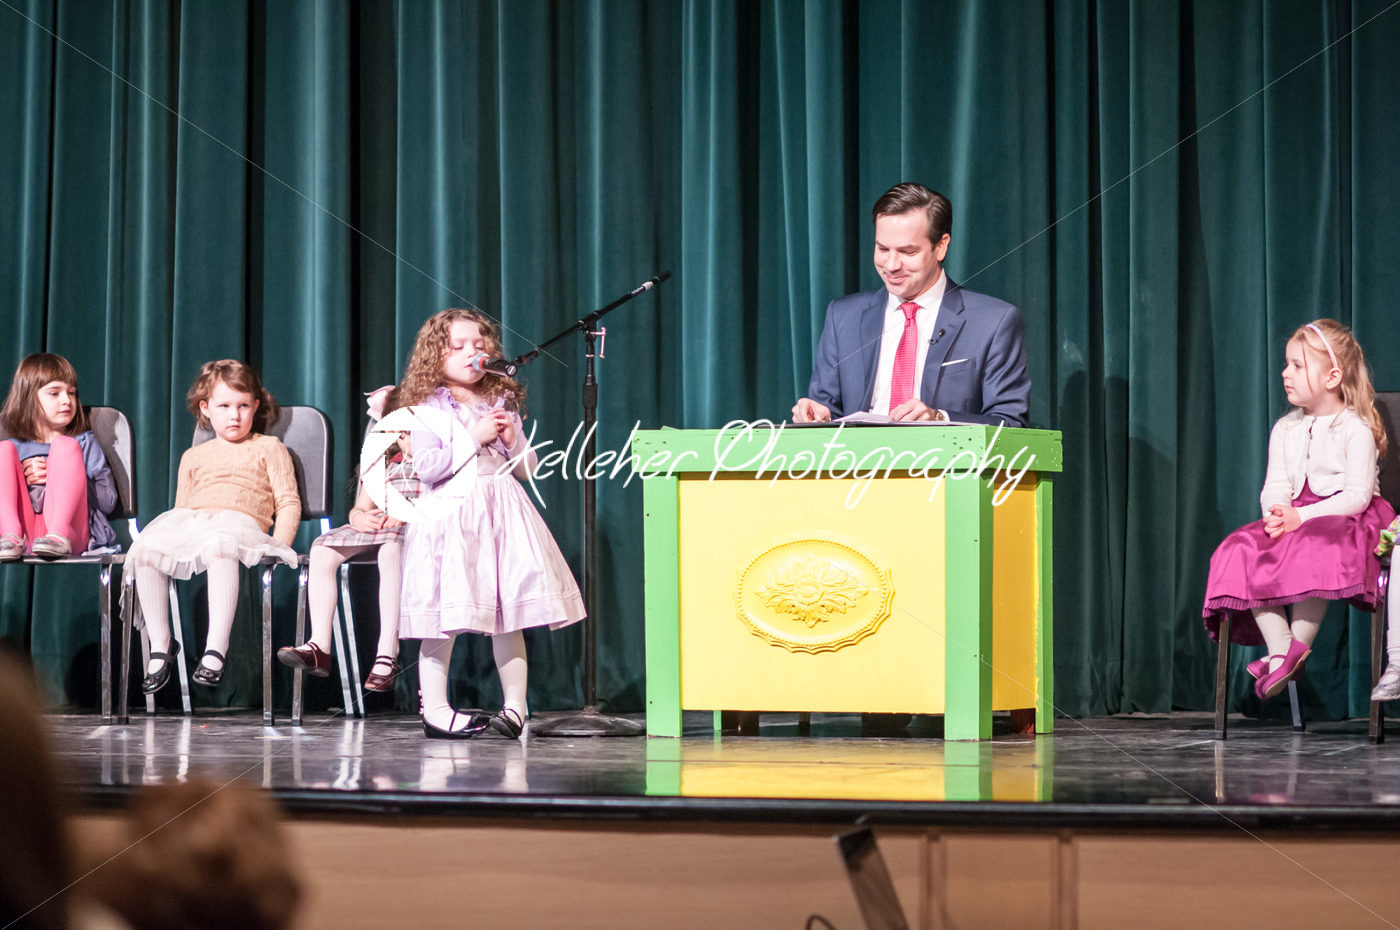 ROSEMONT, PA – MARCH 7: Agnes Irwin Pre-Kindergarten Assembly on March 7, 2014 - Kelleher Photography Store